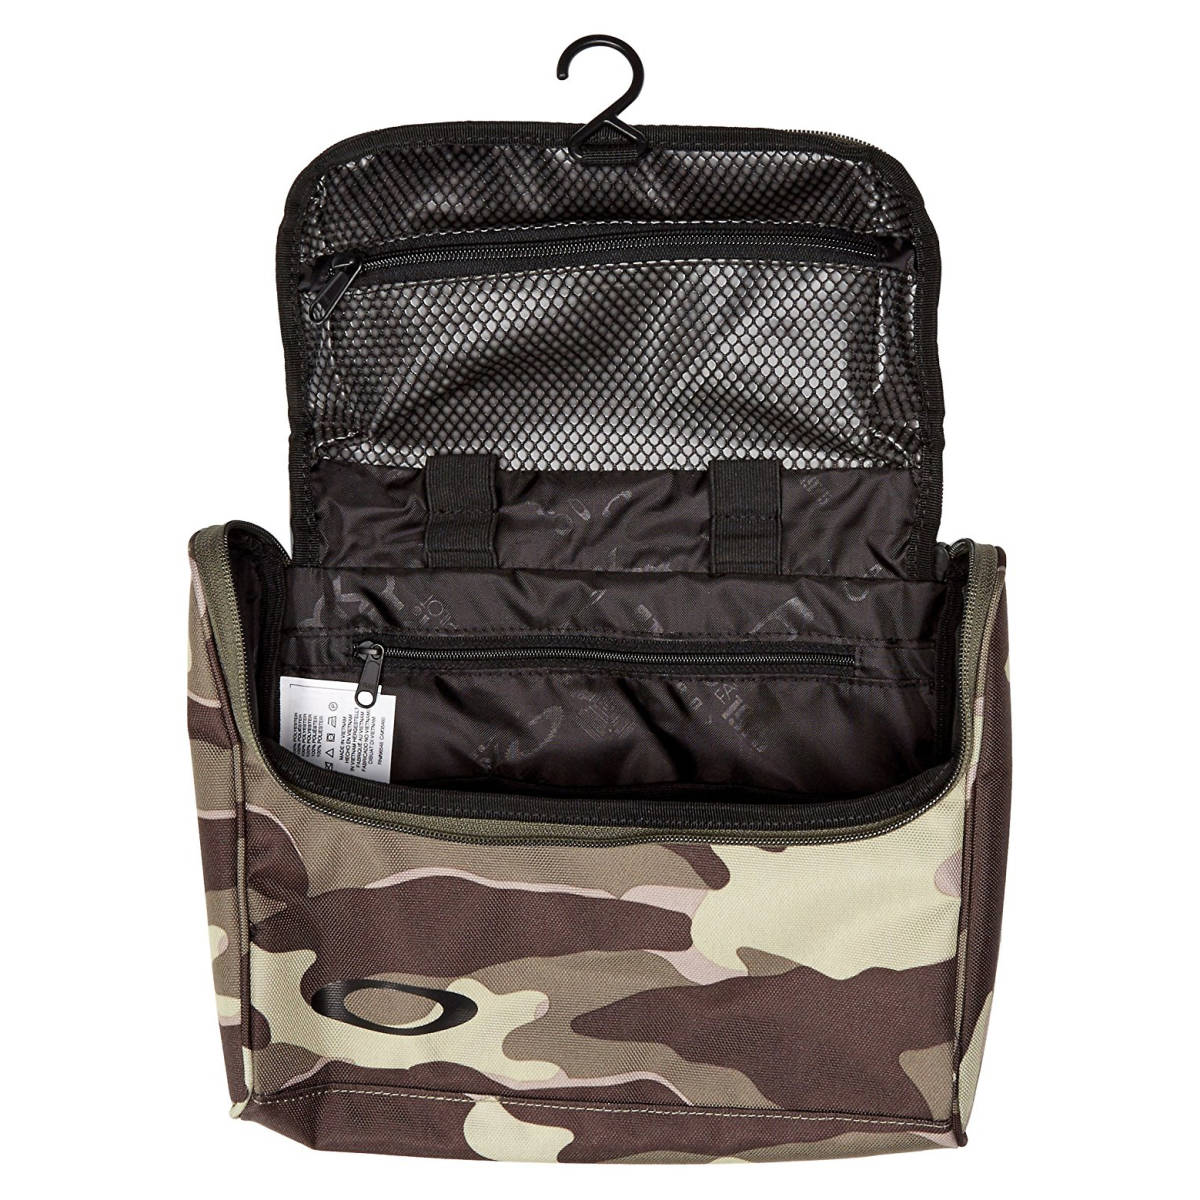 OAKLEY Oacley body bag travel bag small articles storage BODY BAG 2.0 92548-799 duck pattern not yet sale in Japan new goods 